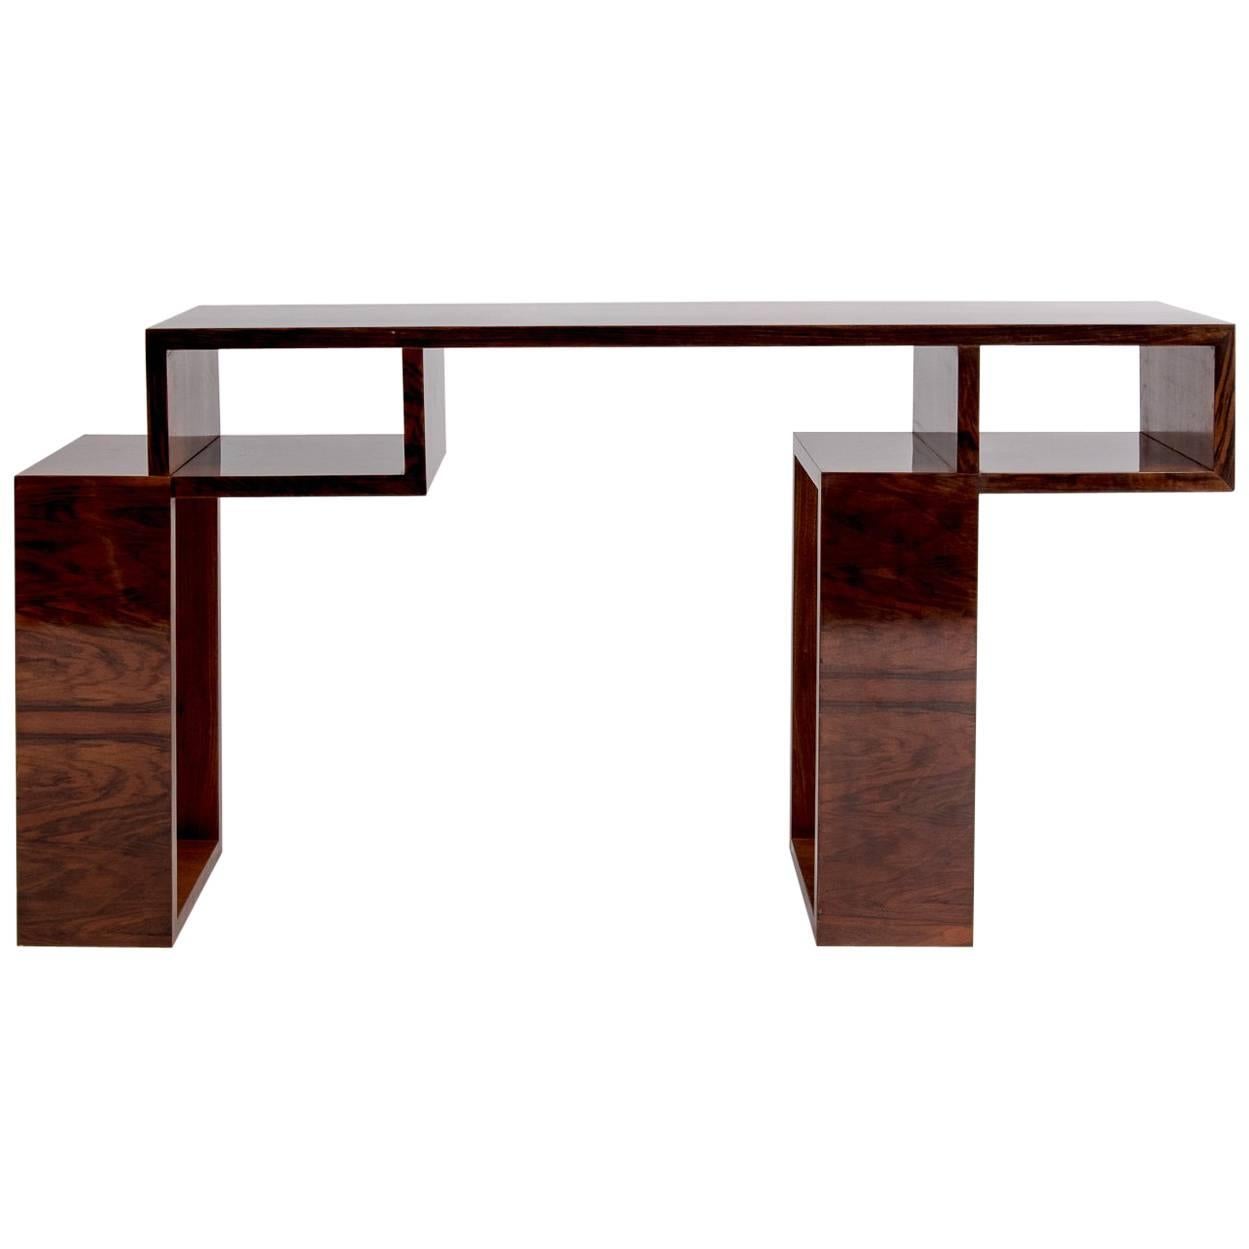 French Art Deco "Cubist" Console Table, circa 1930s For Sale